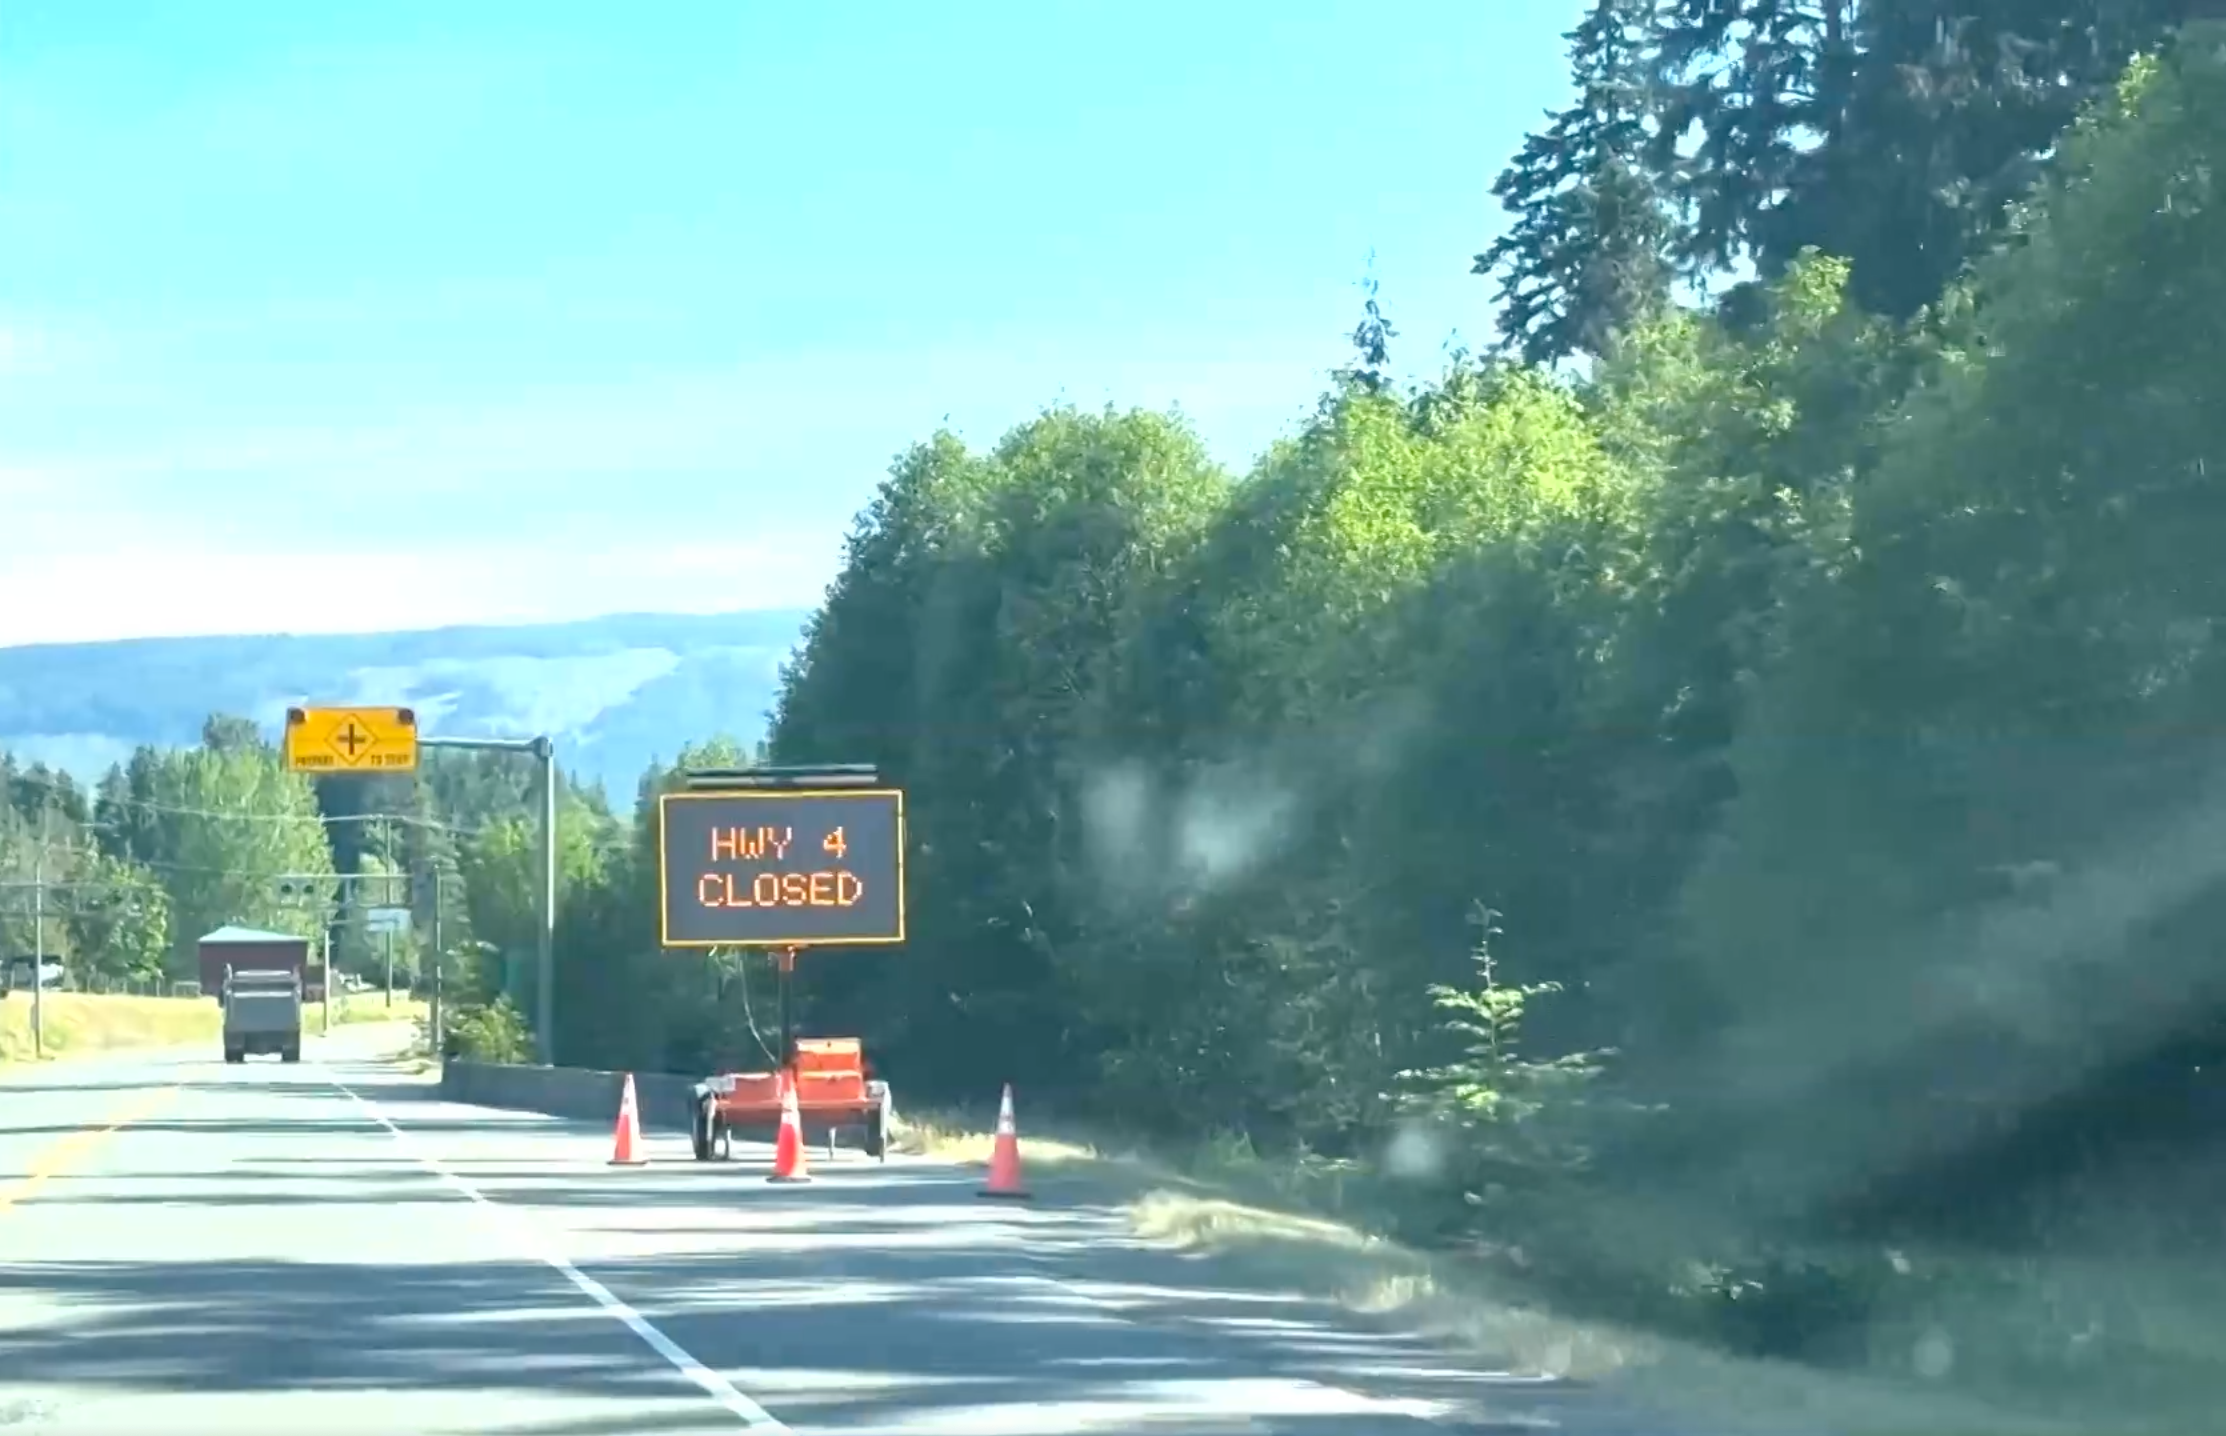 Highway 4 is closed due to fire near Cameron Lake on Vancouver Island in the province of British Columbia, Canada. /CCTV